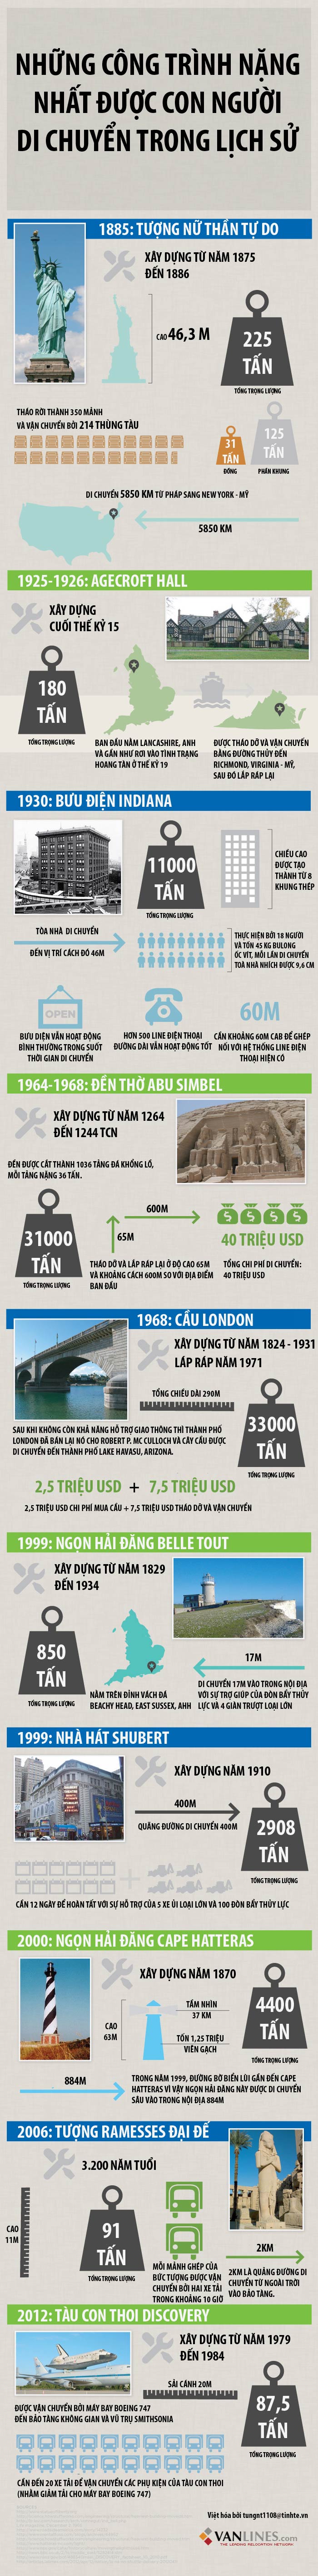 massive-structures-infographic_background.jpg